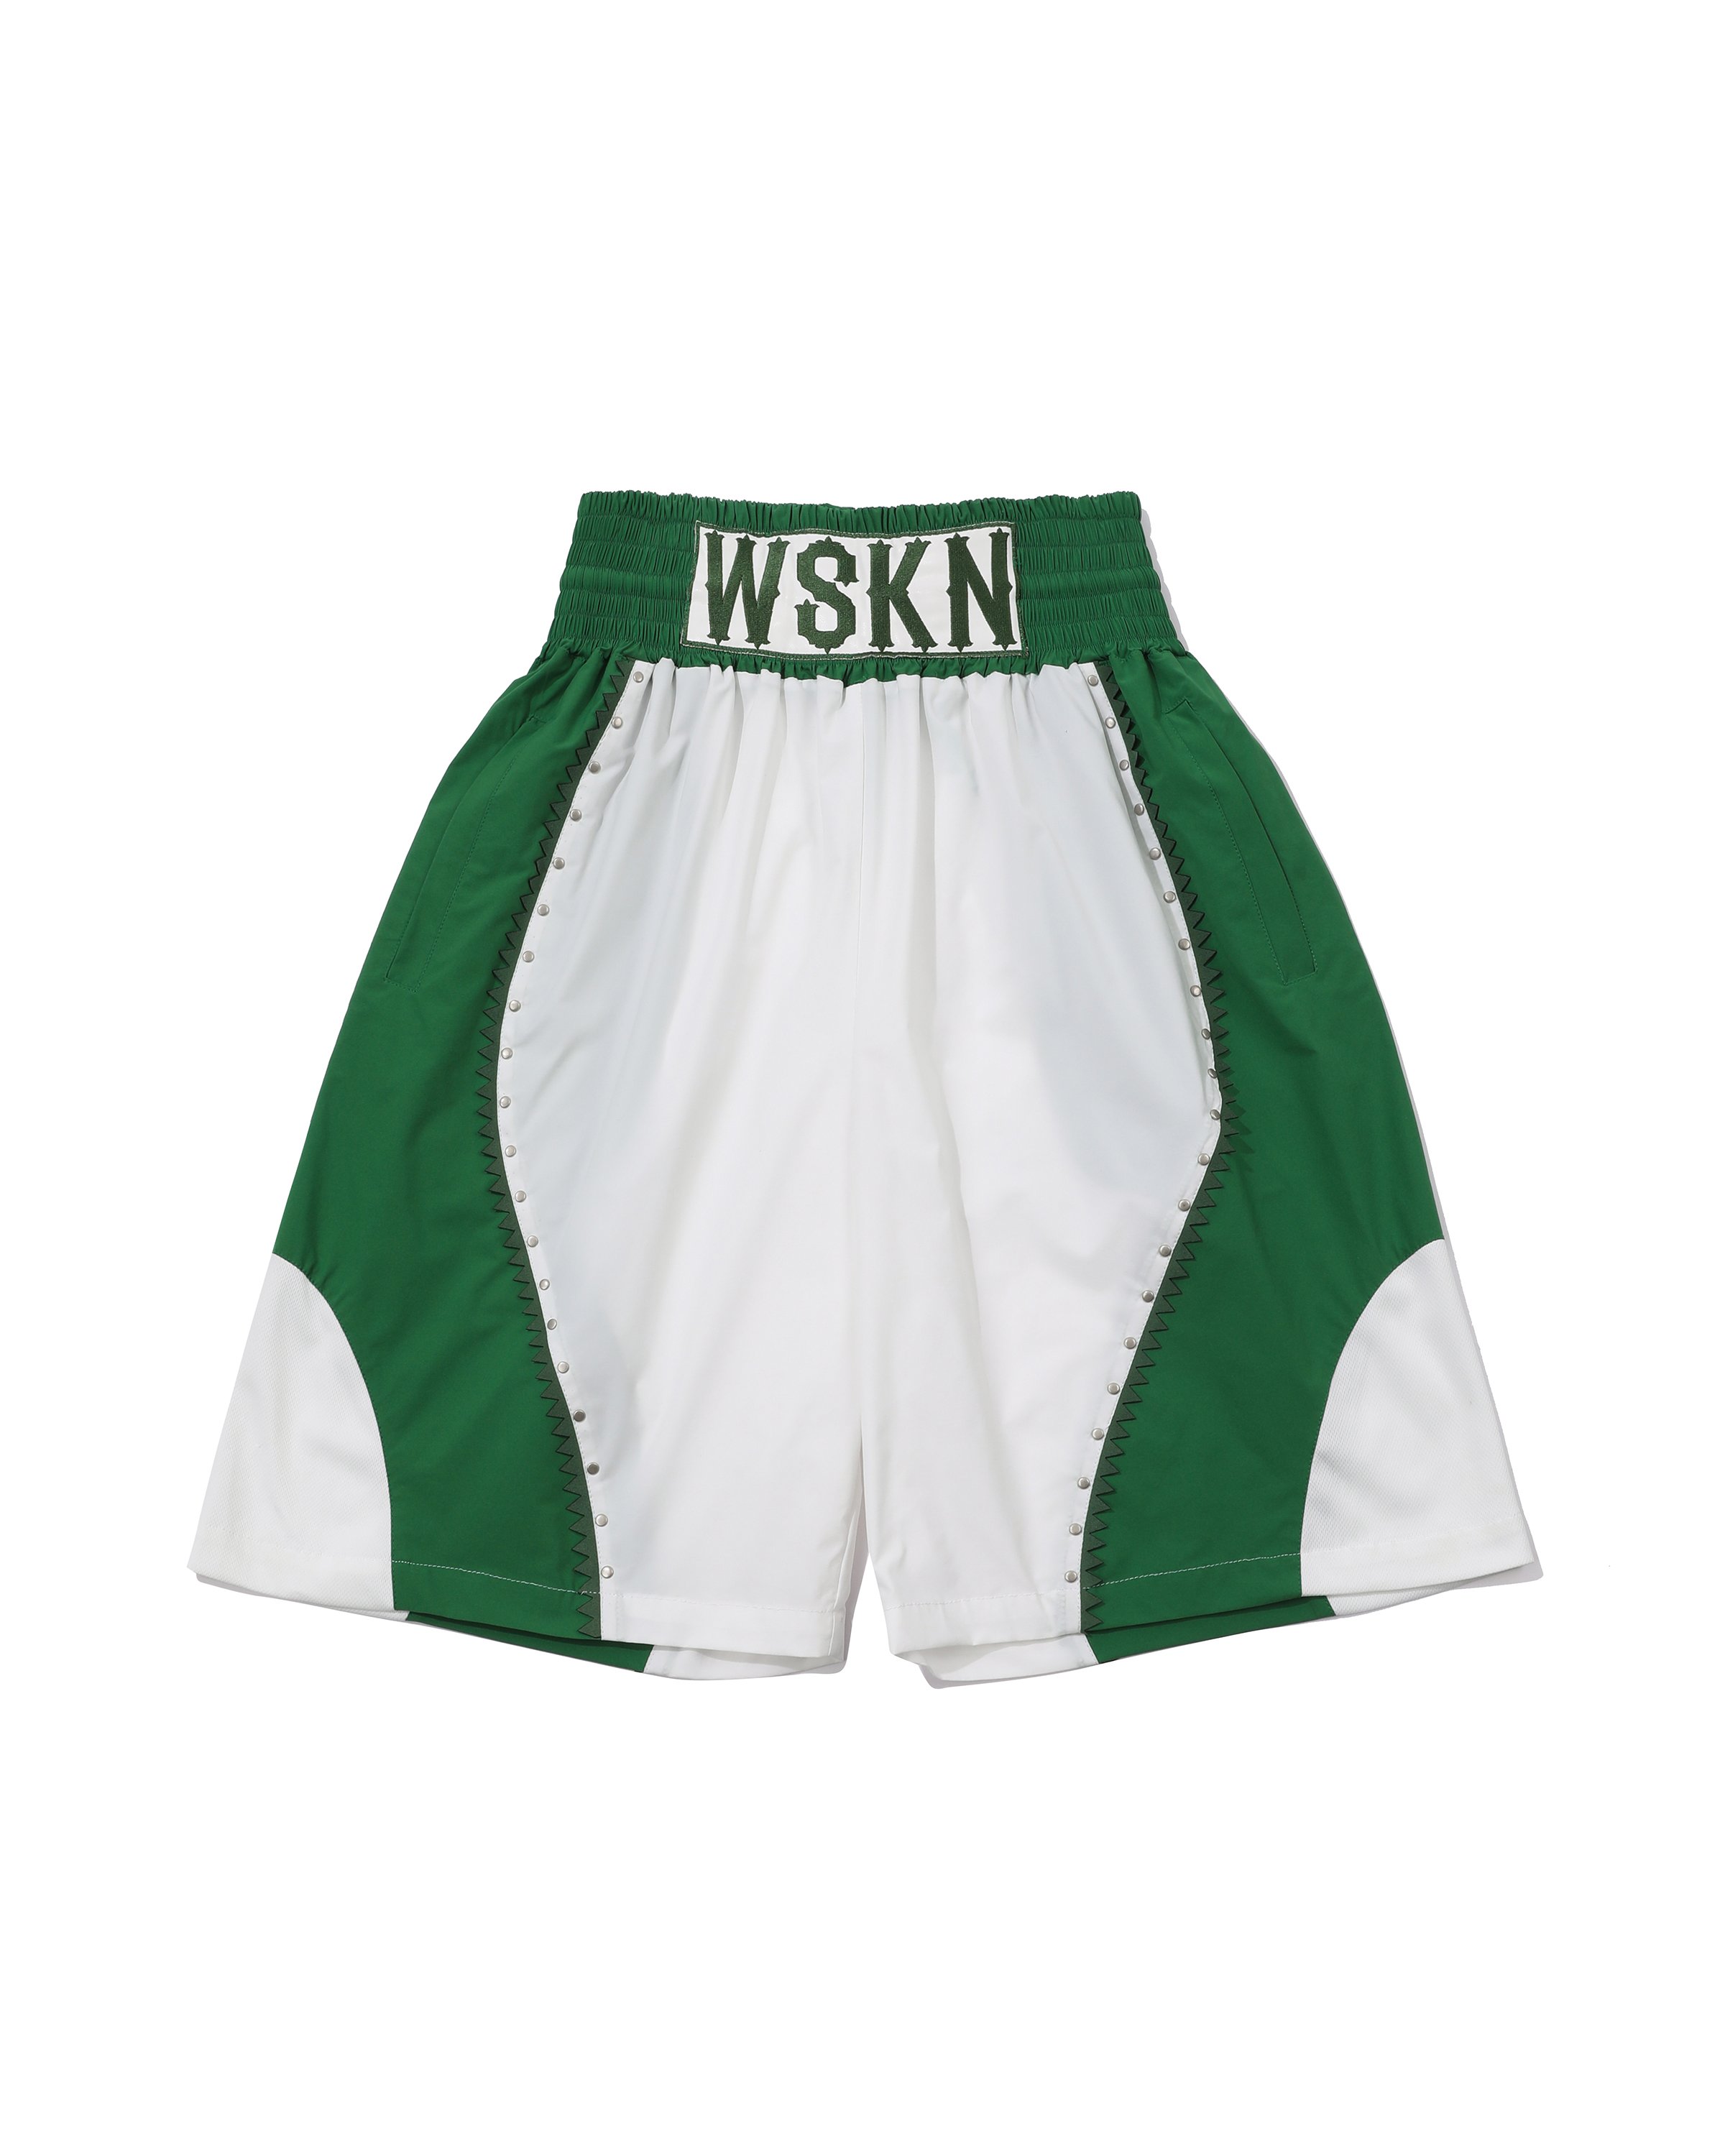 SAWTOOTH LINE BOXING SHORTS(GREEN)